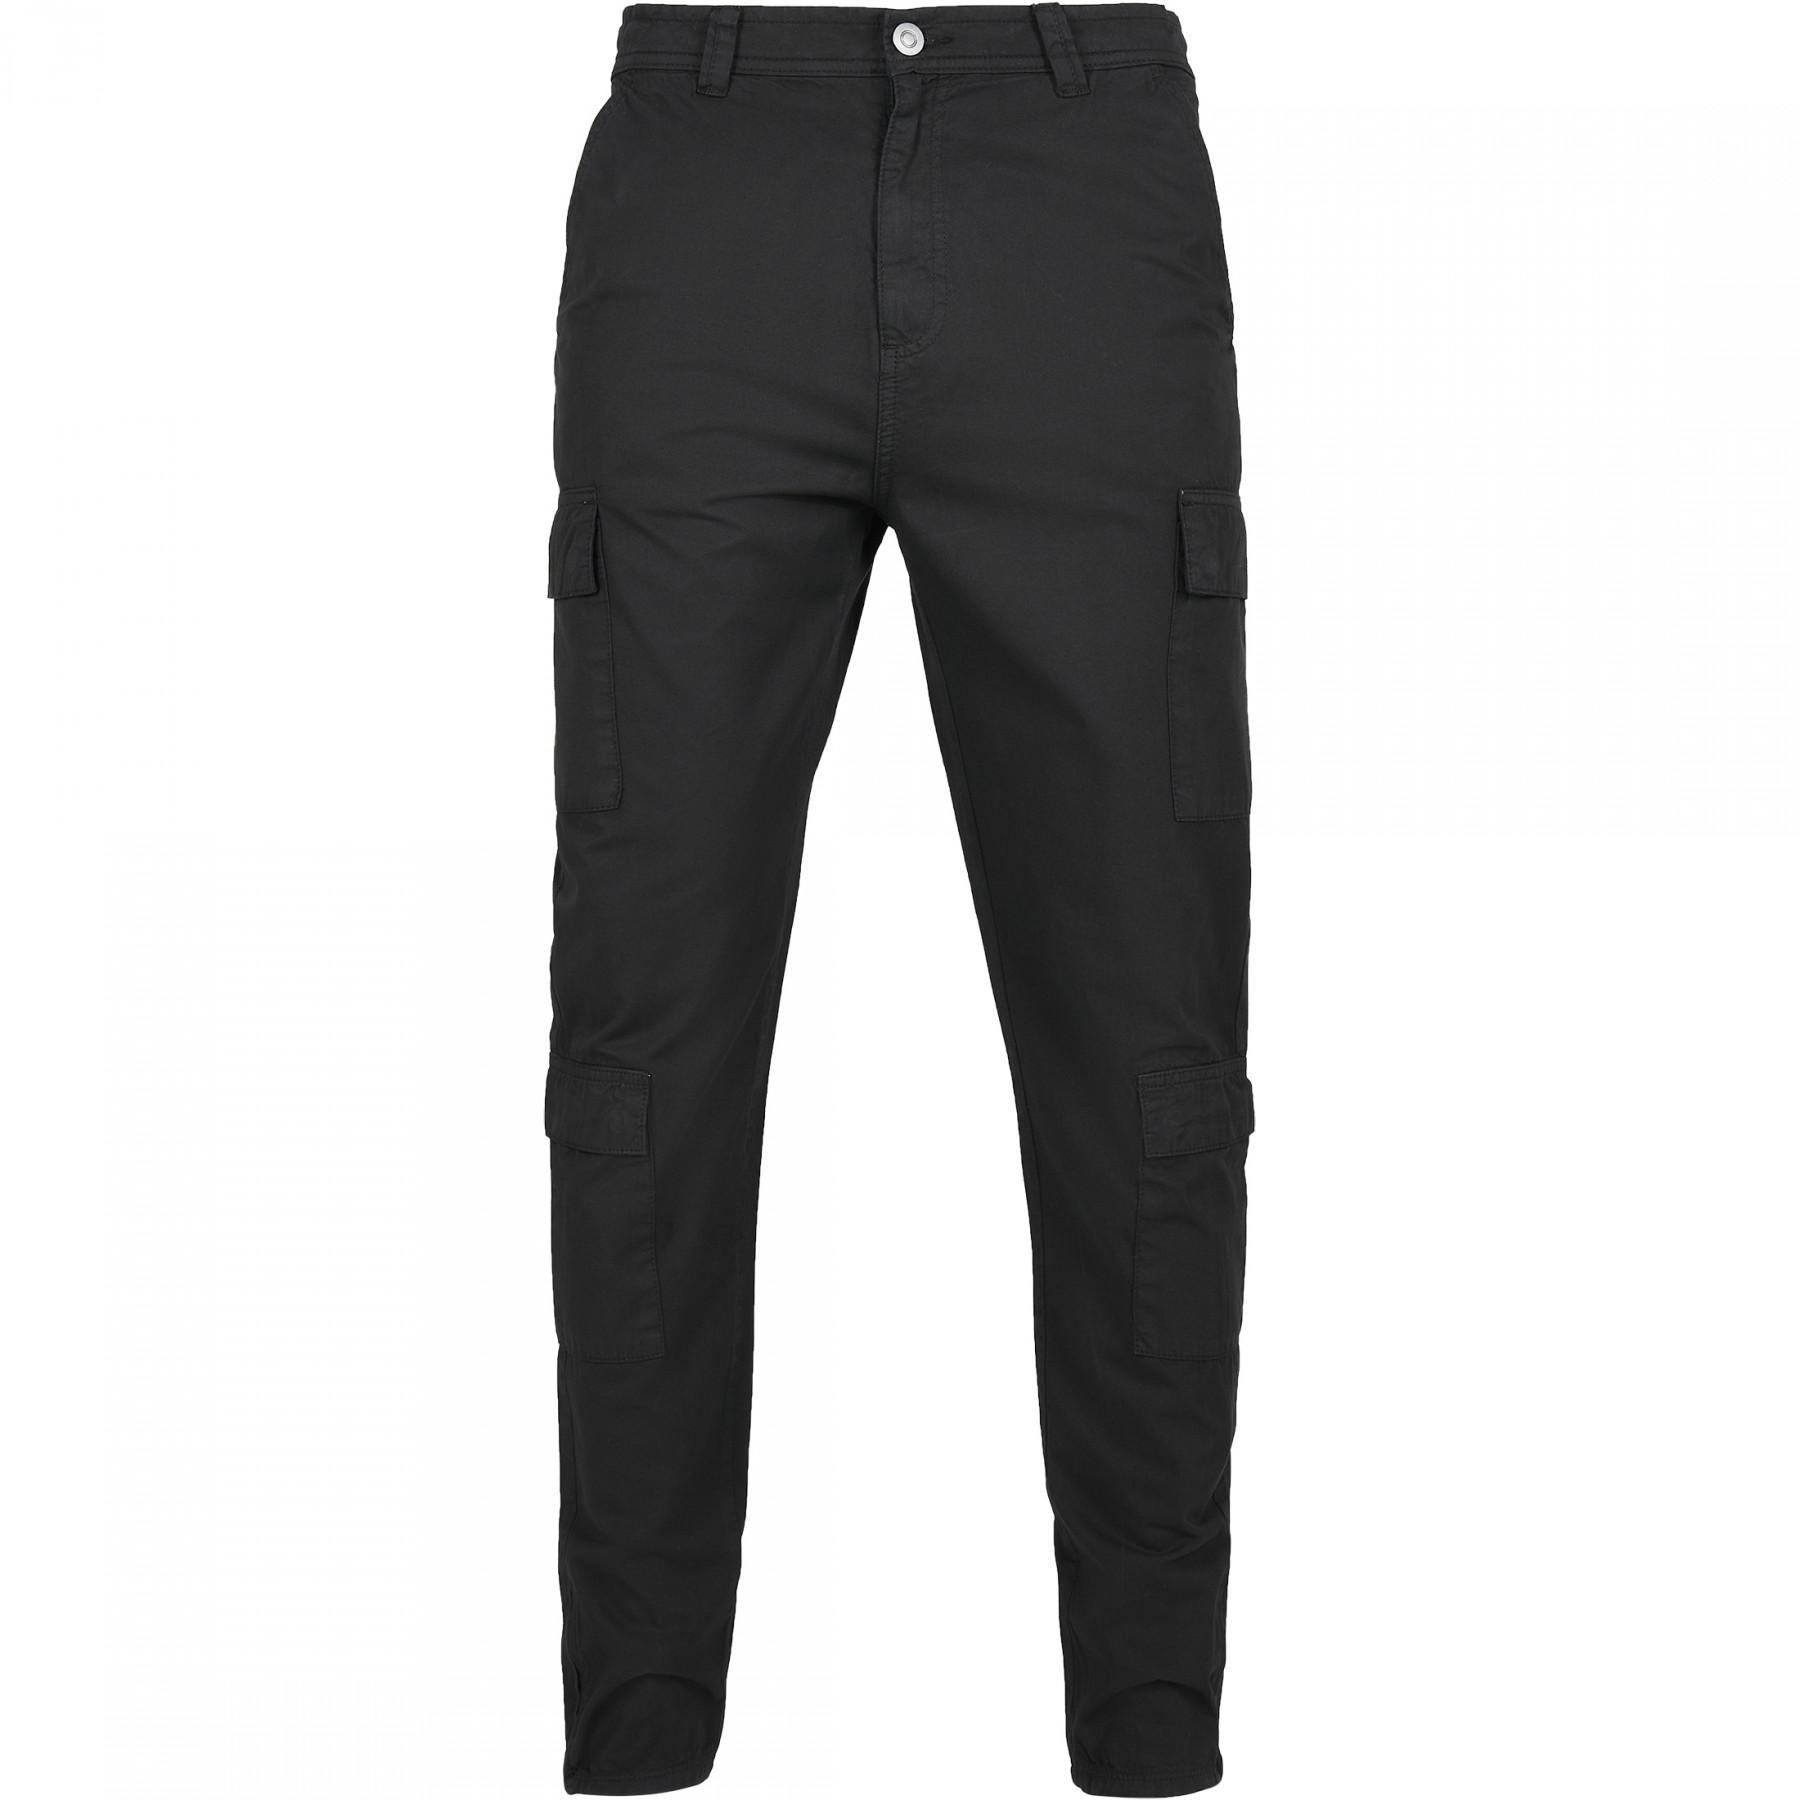 Pantaloni Urban Classics tapered double cargo (grandes tailles)